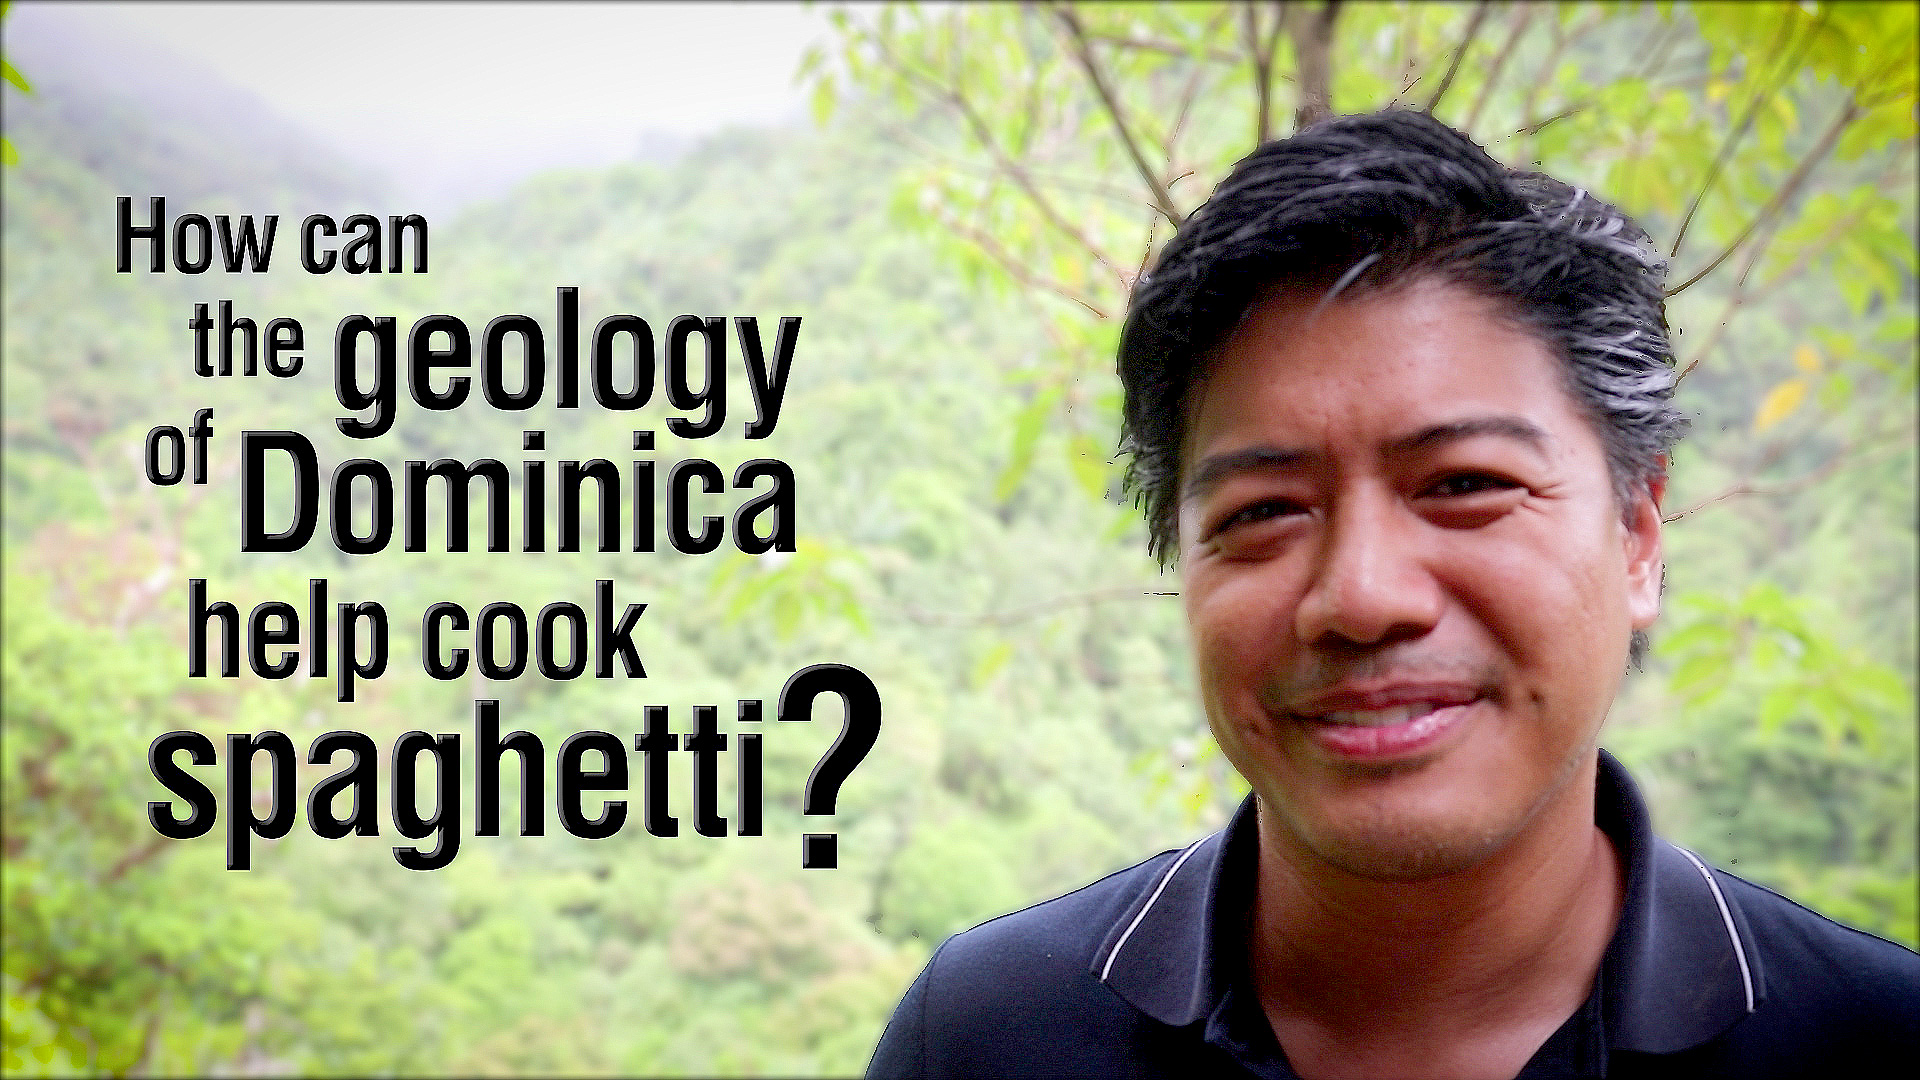 How can the geology of Dominica help cook spaghetti?